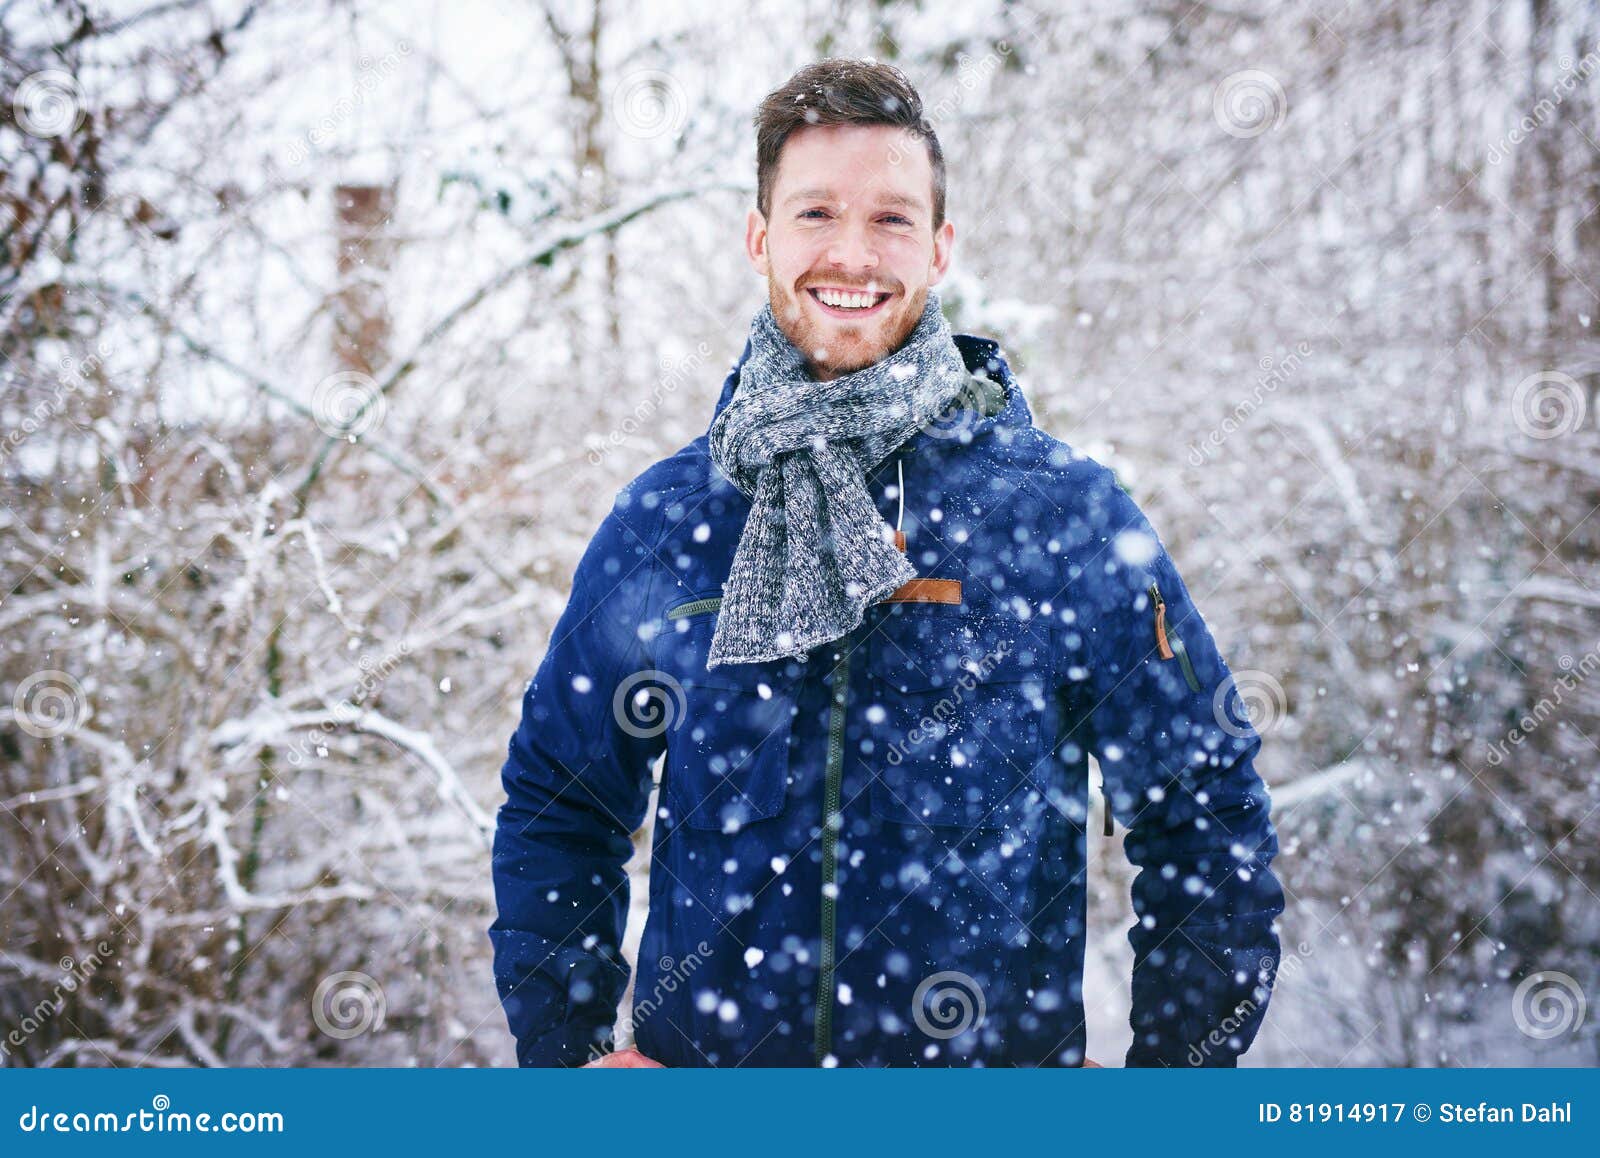 Young Handsome Man in Snowfall Smiling Cheerfully Stock Image - Image ...